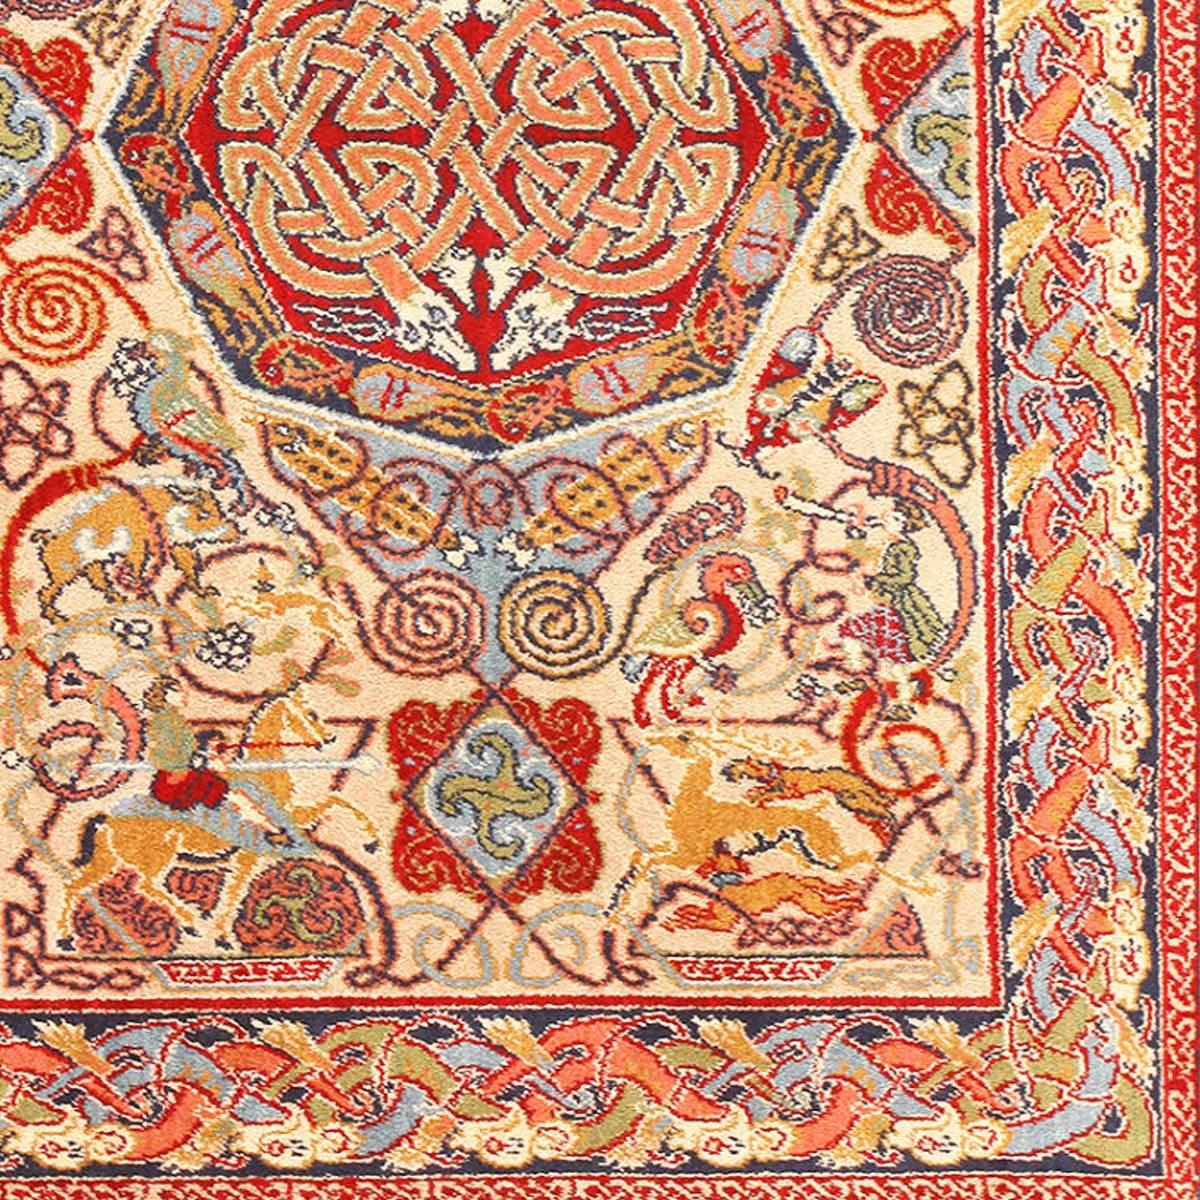 A delightful, variegated pattern spills over the creamy yellow body of this European vintage rug. Featuring a variety of complex Celtic knot-work, the hunting scene rug design is centered with a red octagon that brims with entwined snakes. This